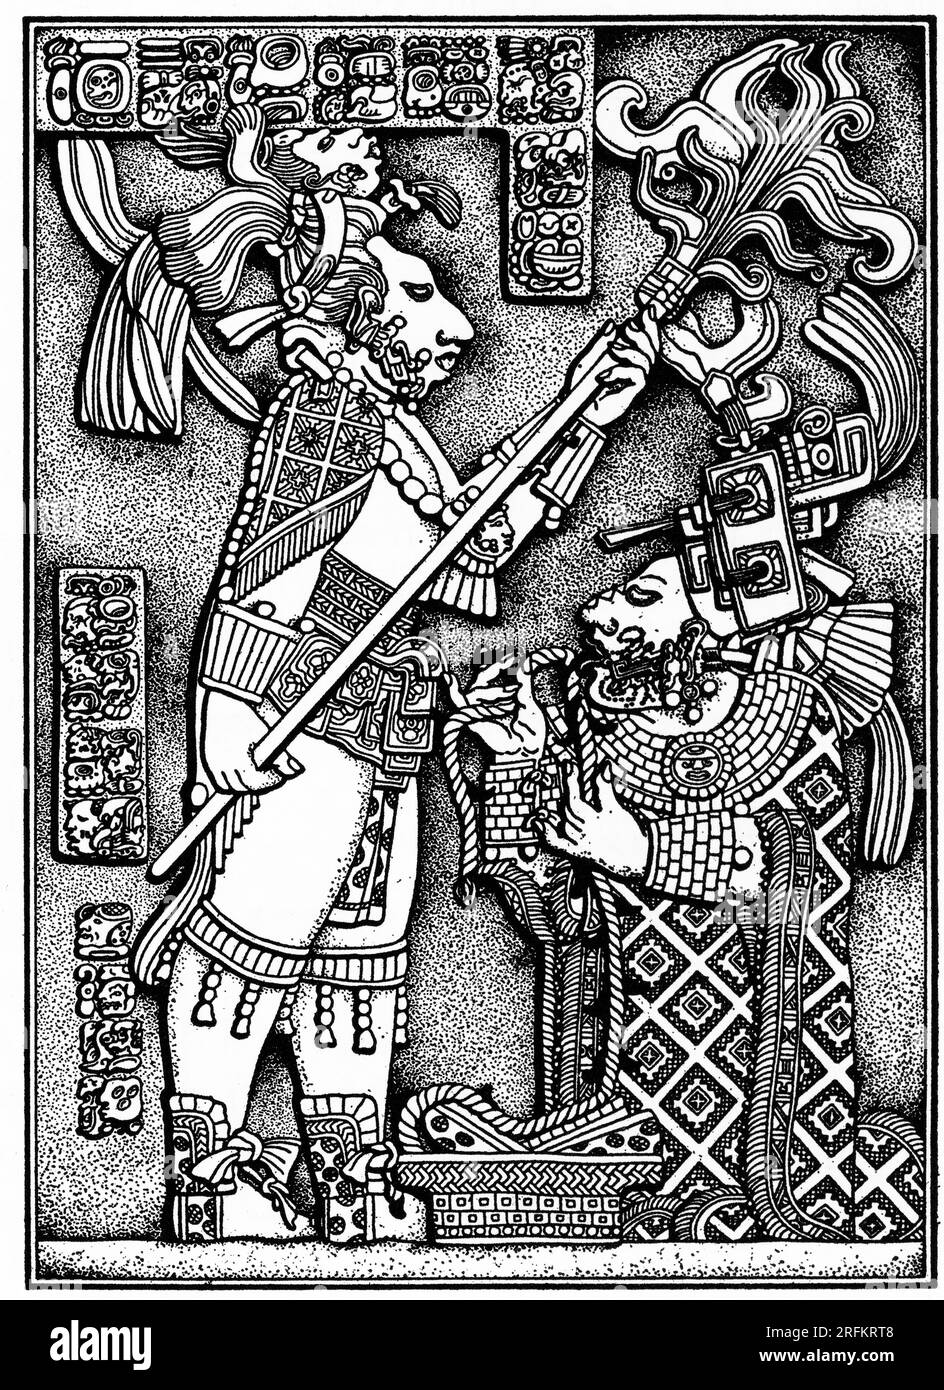 An illustration of Lintel 24. A Maya limestone sculpture from Yaxchilan, Chiapas, Mexico, c1885. After Desire Charnay (1828-1915). The lintel dates to about 723-726 AD, placing it within the Maya Late Classic period. It depicts the ruler of Yaxchilan, Itzamnaaj Bahlam III (647-742) and his consort Lady K’abal Xoc, performing a ceremony of bloodletting. Stock Photo